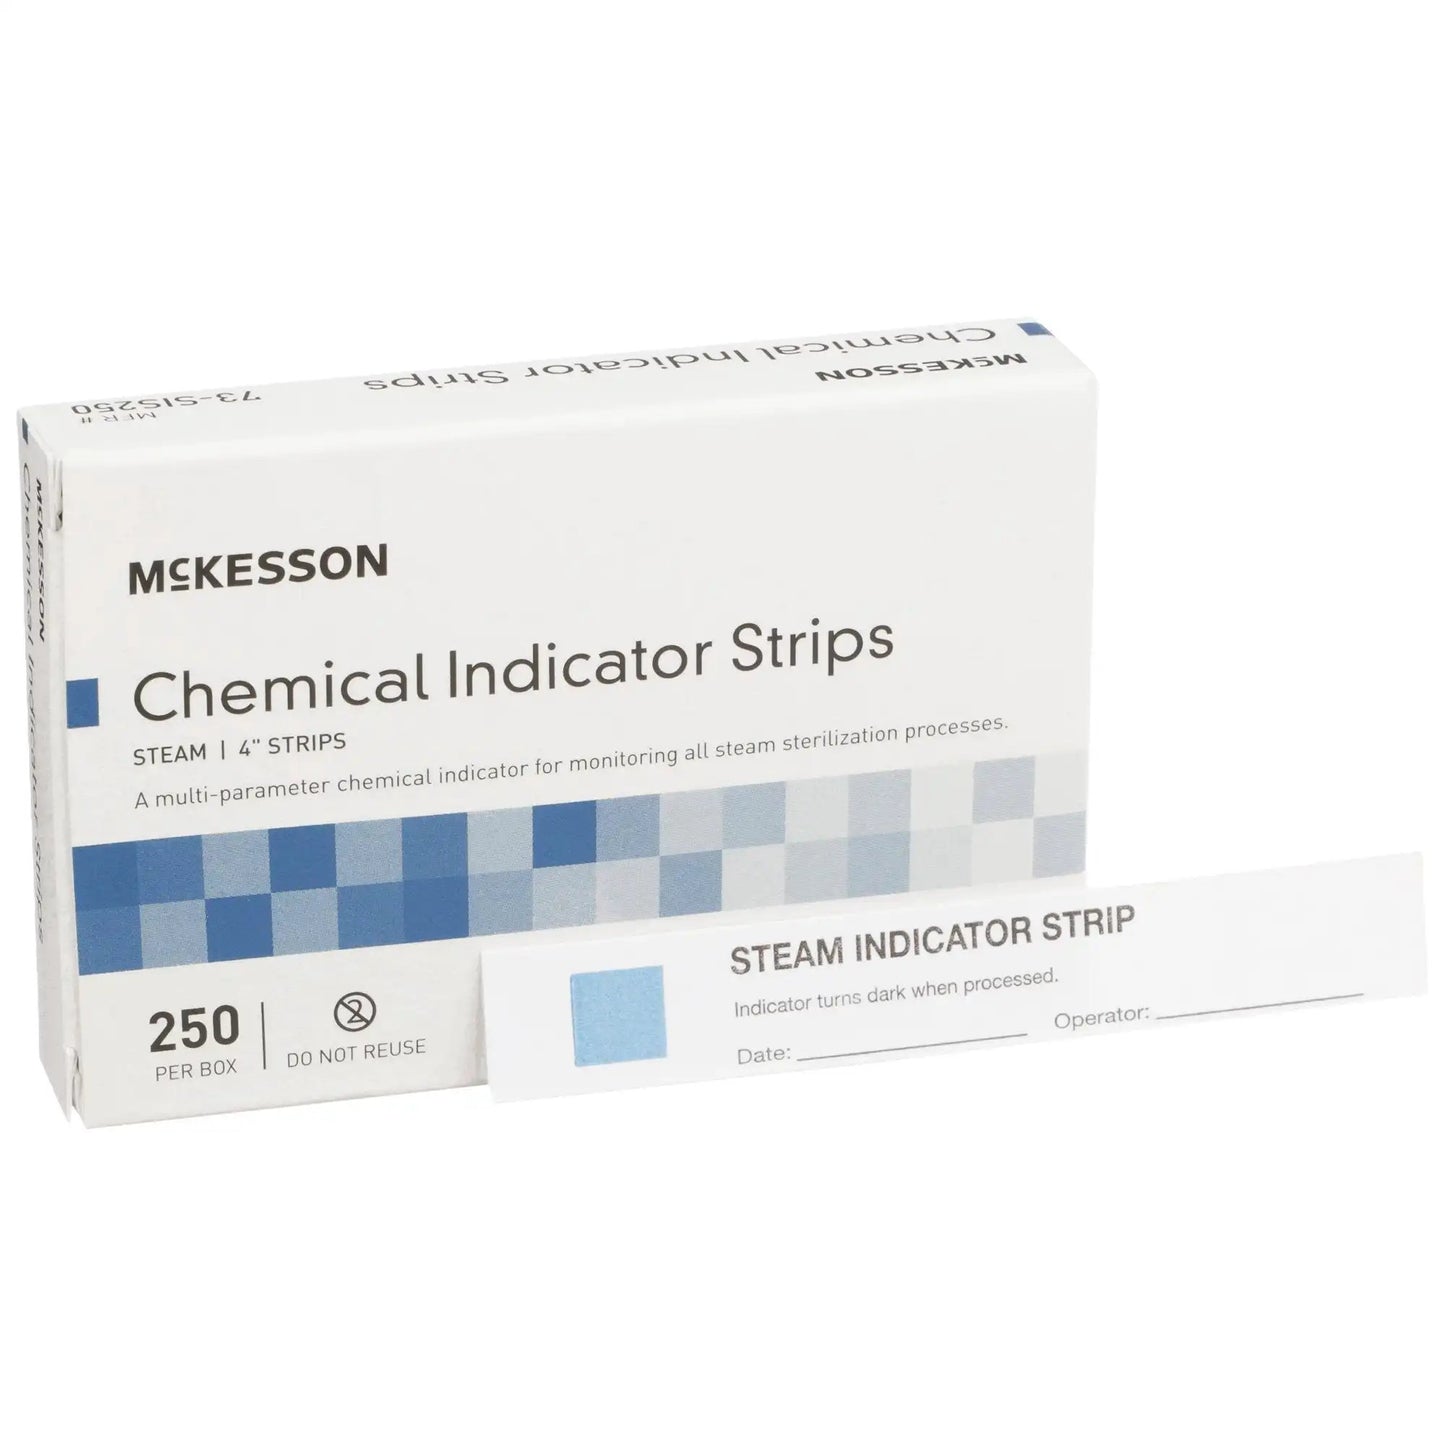 STER-ALL Performance Sterilization Chemical Indicator Strip